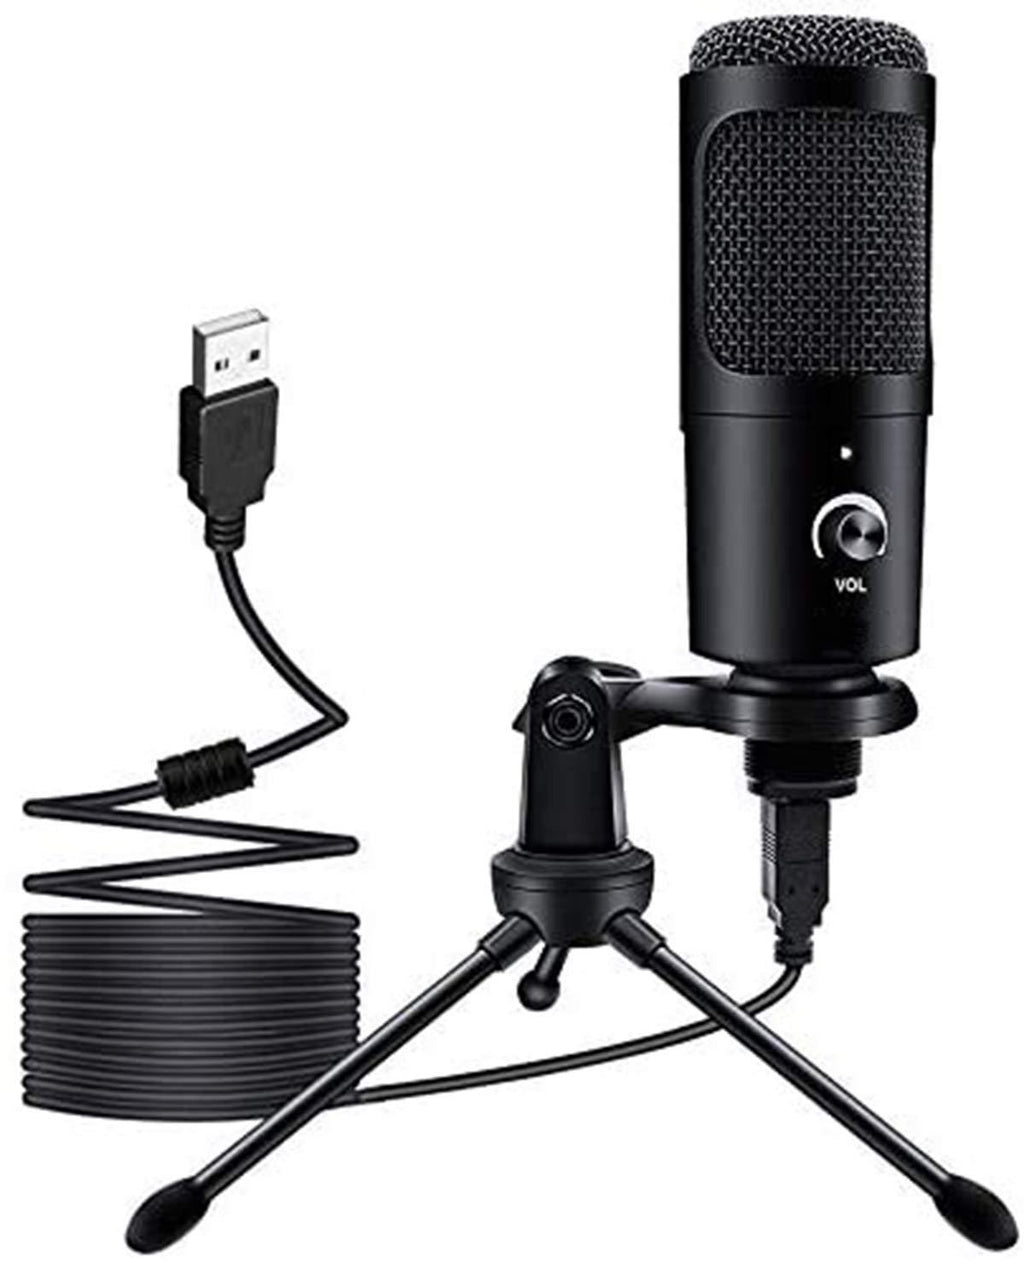 USB Microphone, Gaming Podcasting Microphone Condenser Computer PC Microphone with Tripod Stand Studio Recording Mic for Gaming, Streaming, YouTube,Singing, and Conference for Laptop Desktop